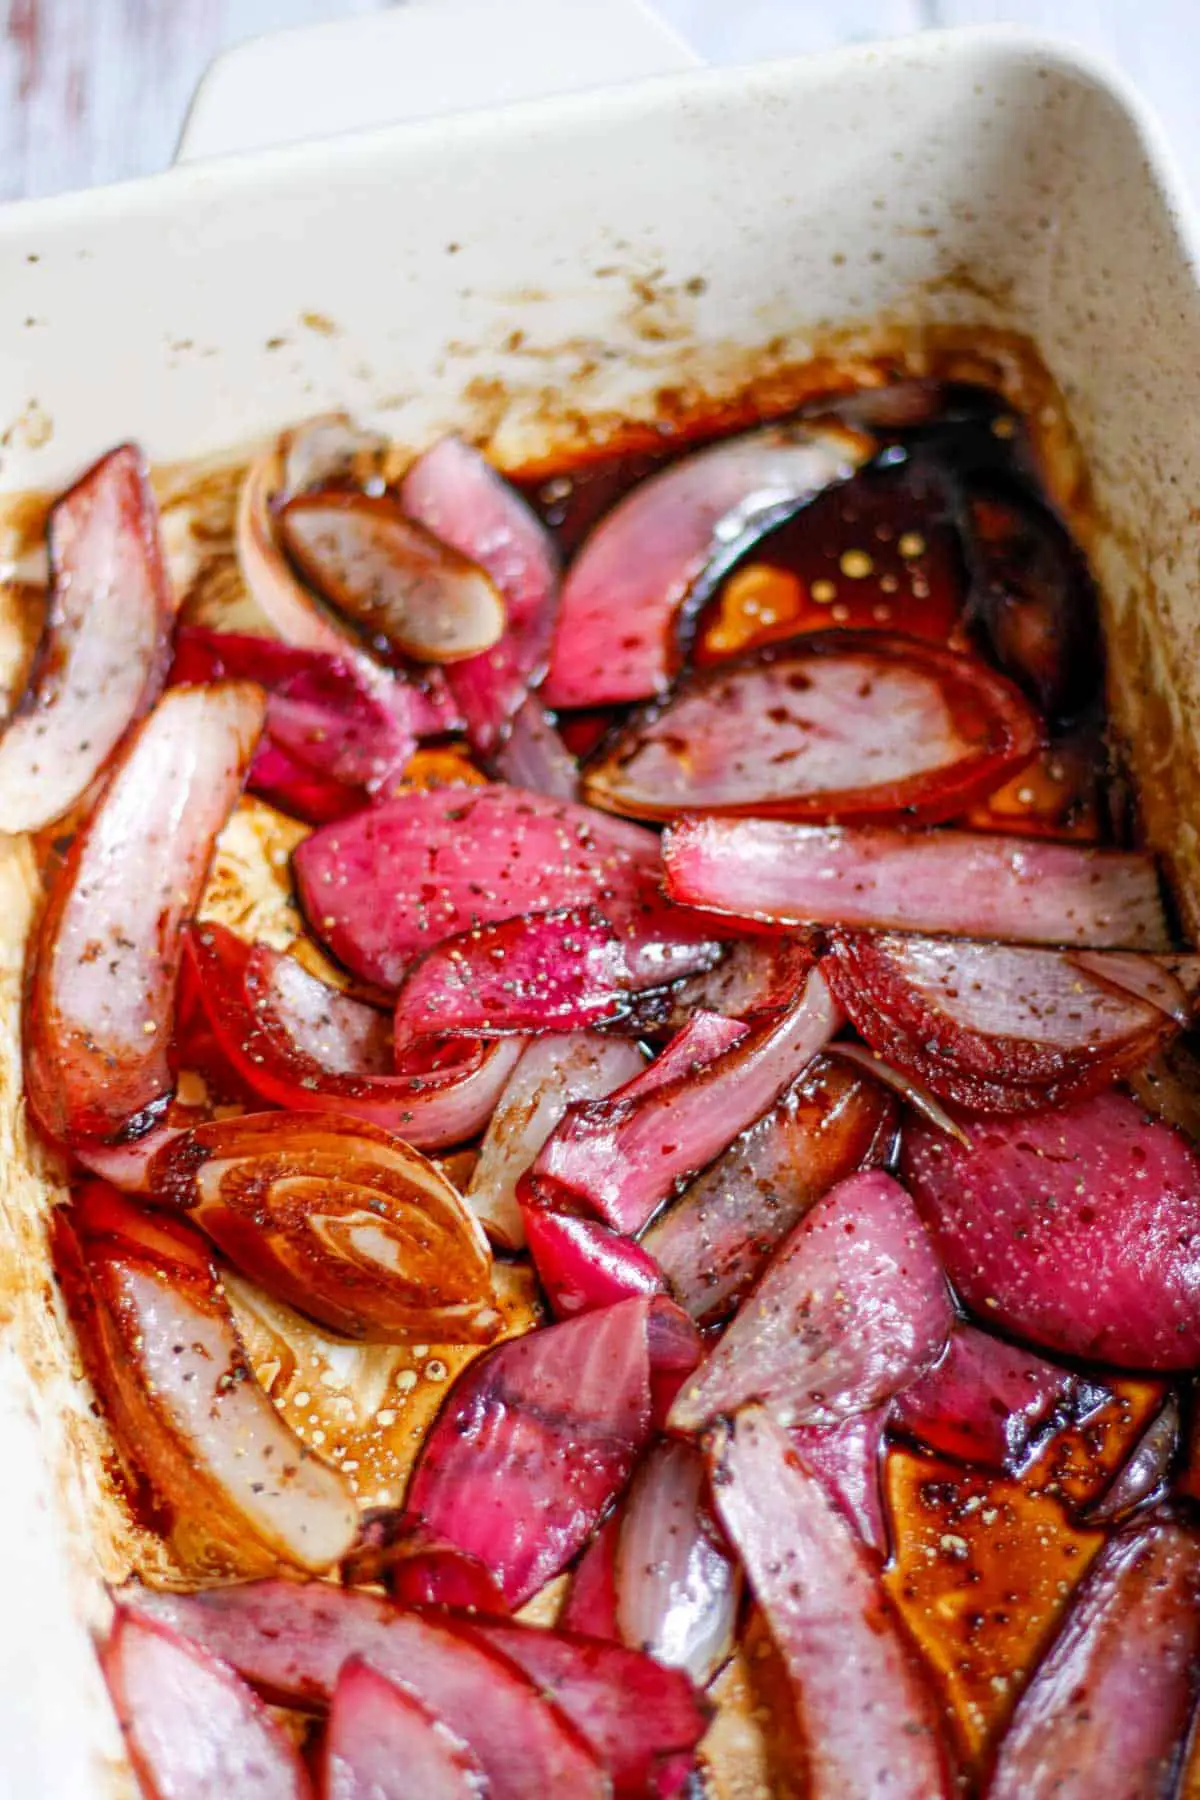 Red onion slices that have been roasted with balsamic vinegar in a baking dish.